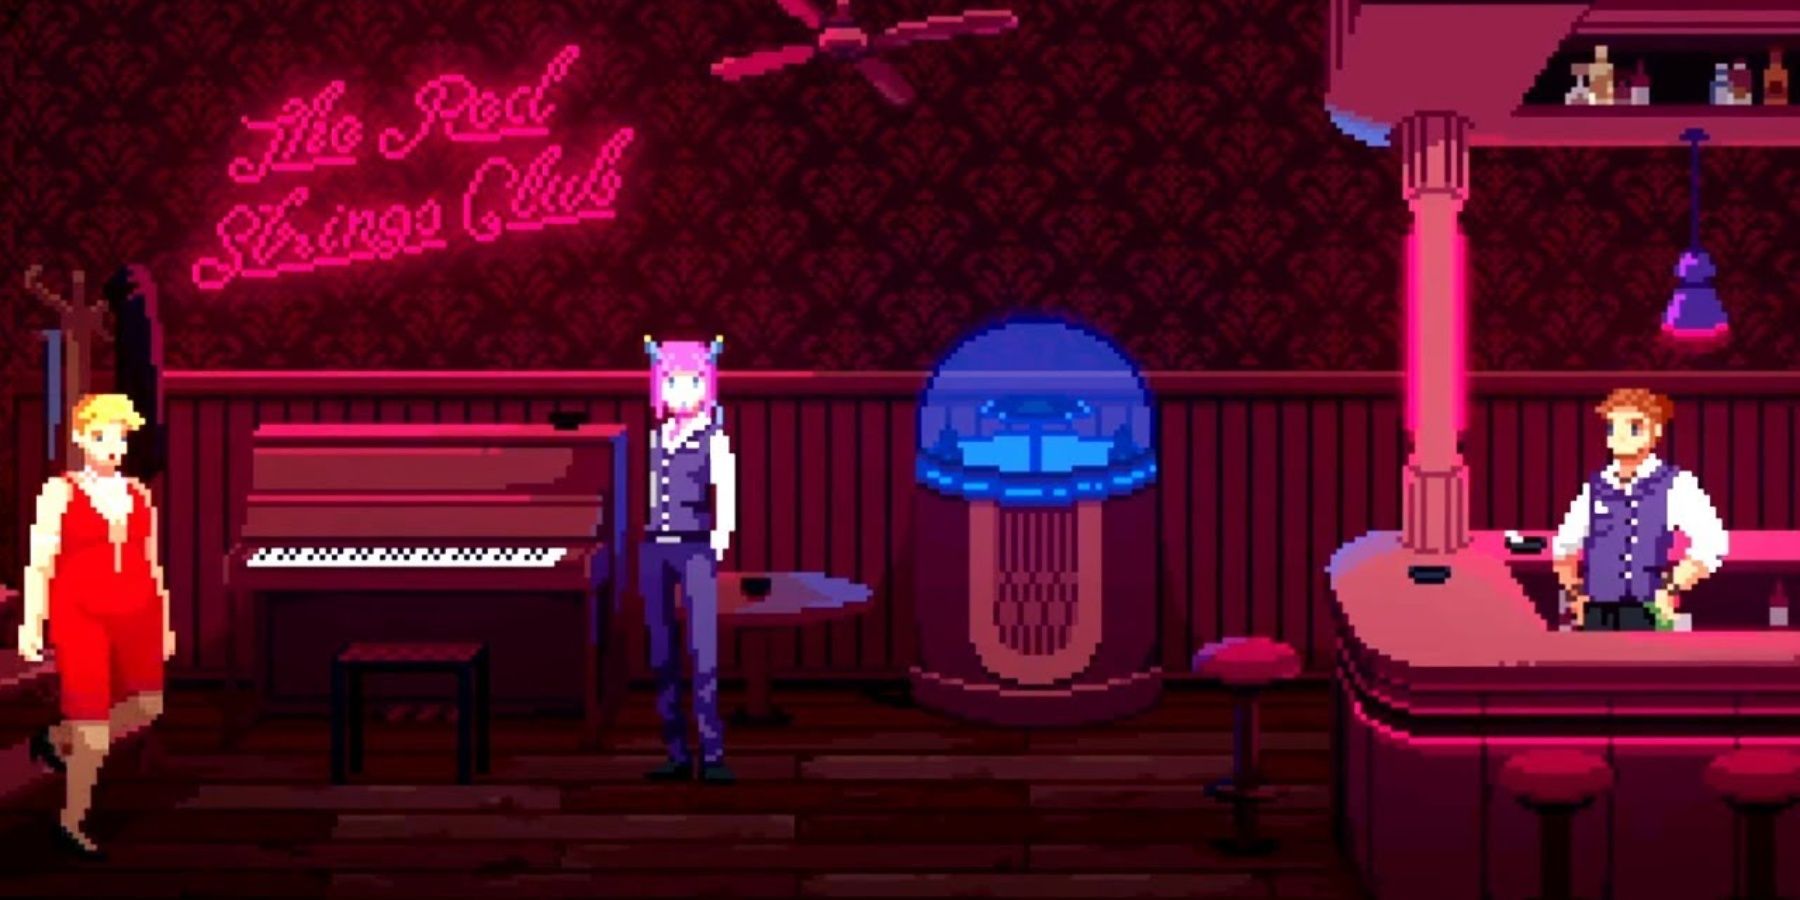 The Red Strings Club gameplay